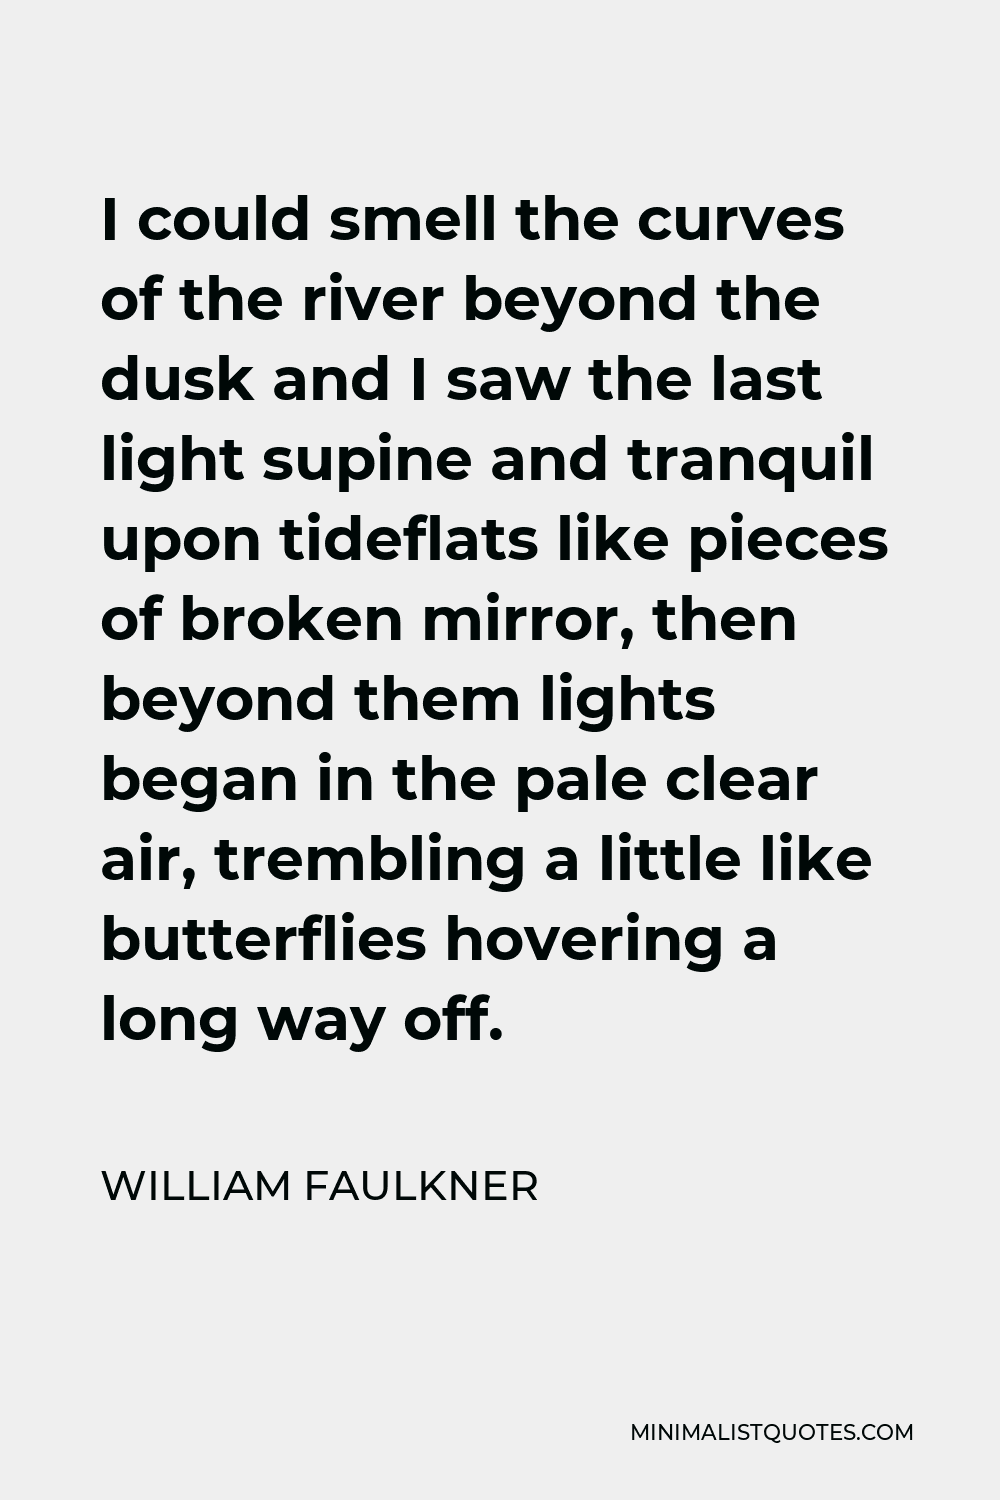 William Faulkner Quote - I could smell the curves of the river beyond the dusk and I saw the last light supine and tranquil upon tideflats like pieces of broken mirror, then beyond them lights began in the pale clear air, trembling a little like butterflies hovering a long way off.